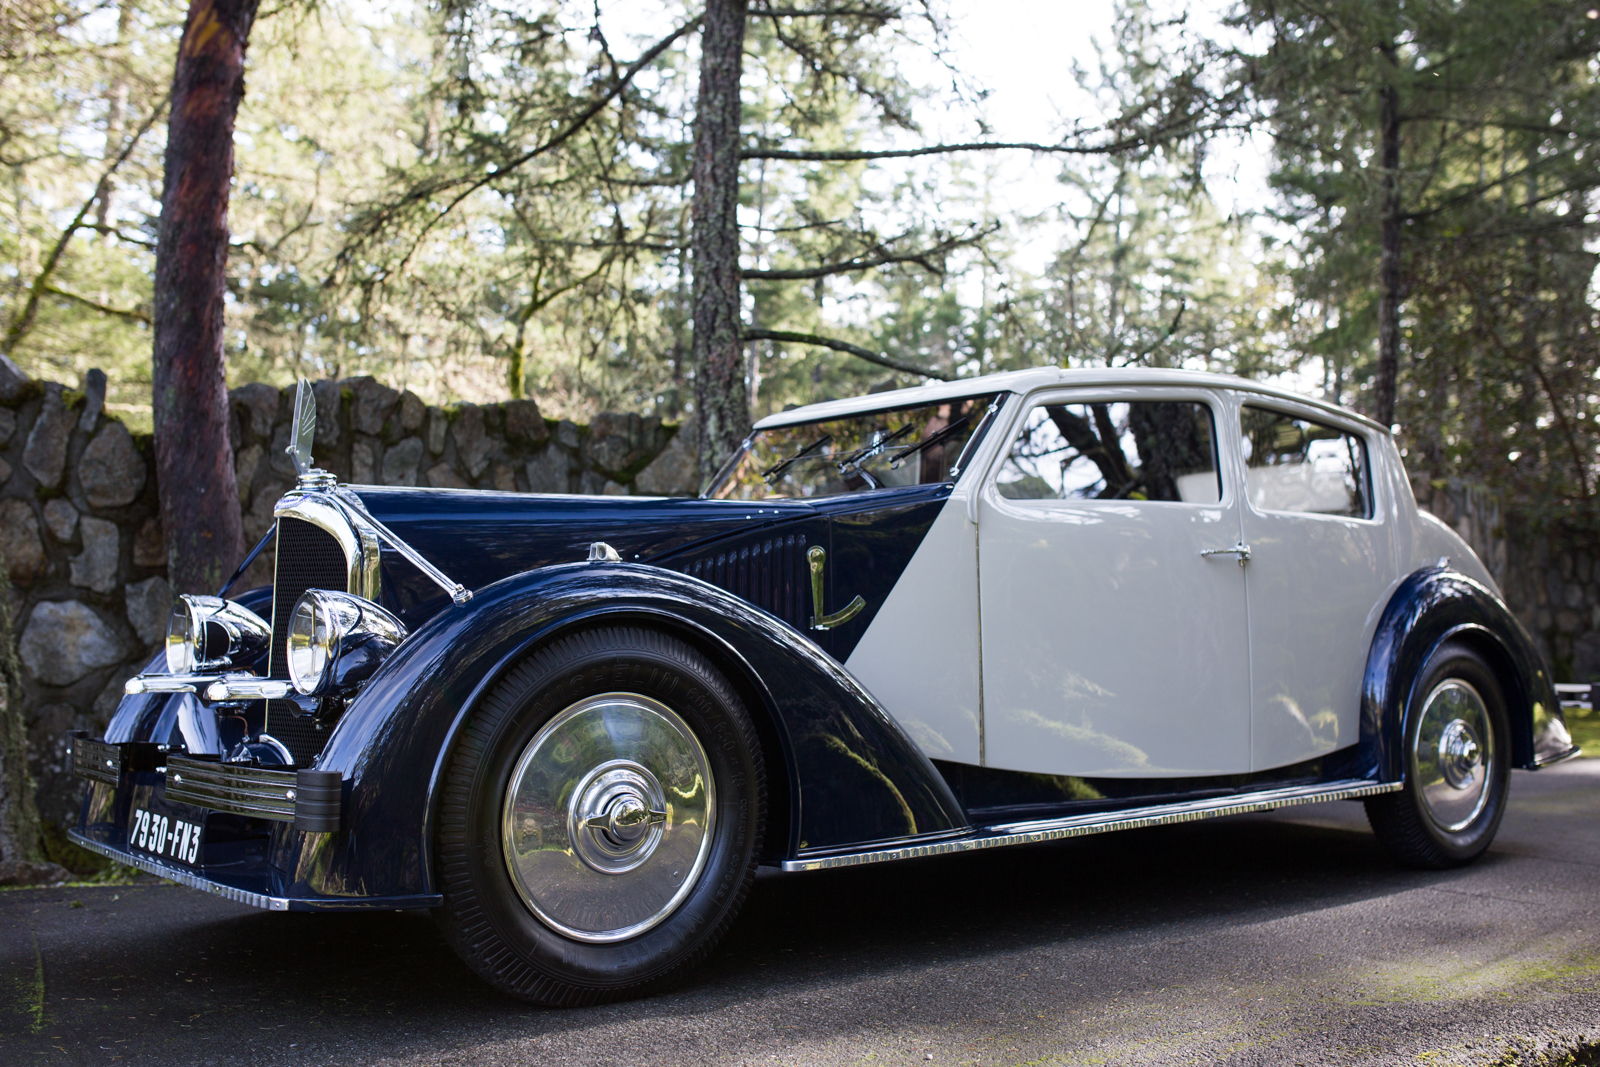 After 10 years (7 in restoration) we’ve completed the 1936 Avions-Voisin C25